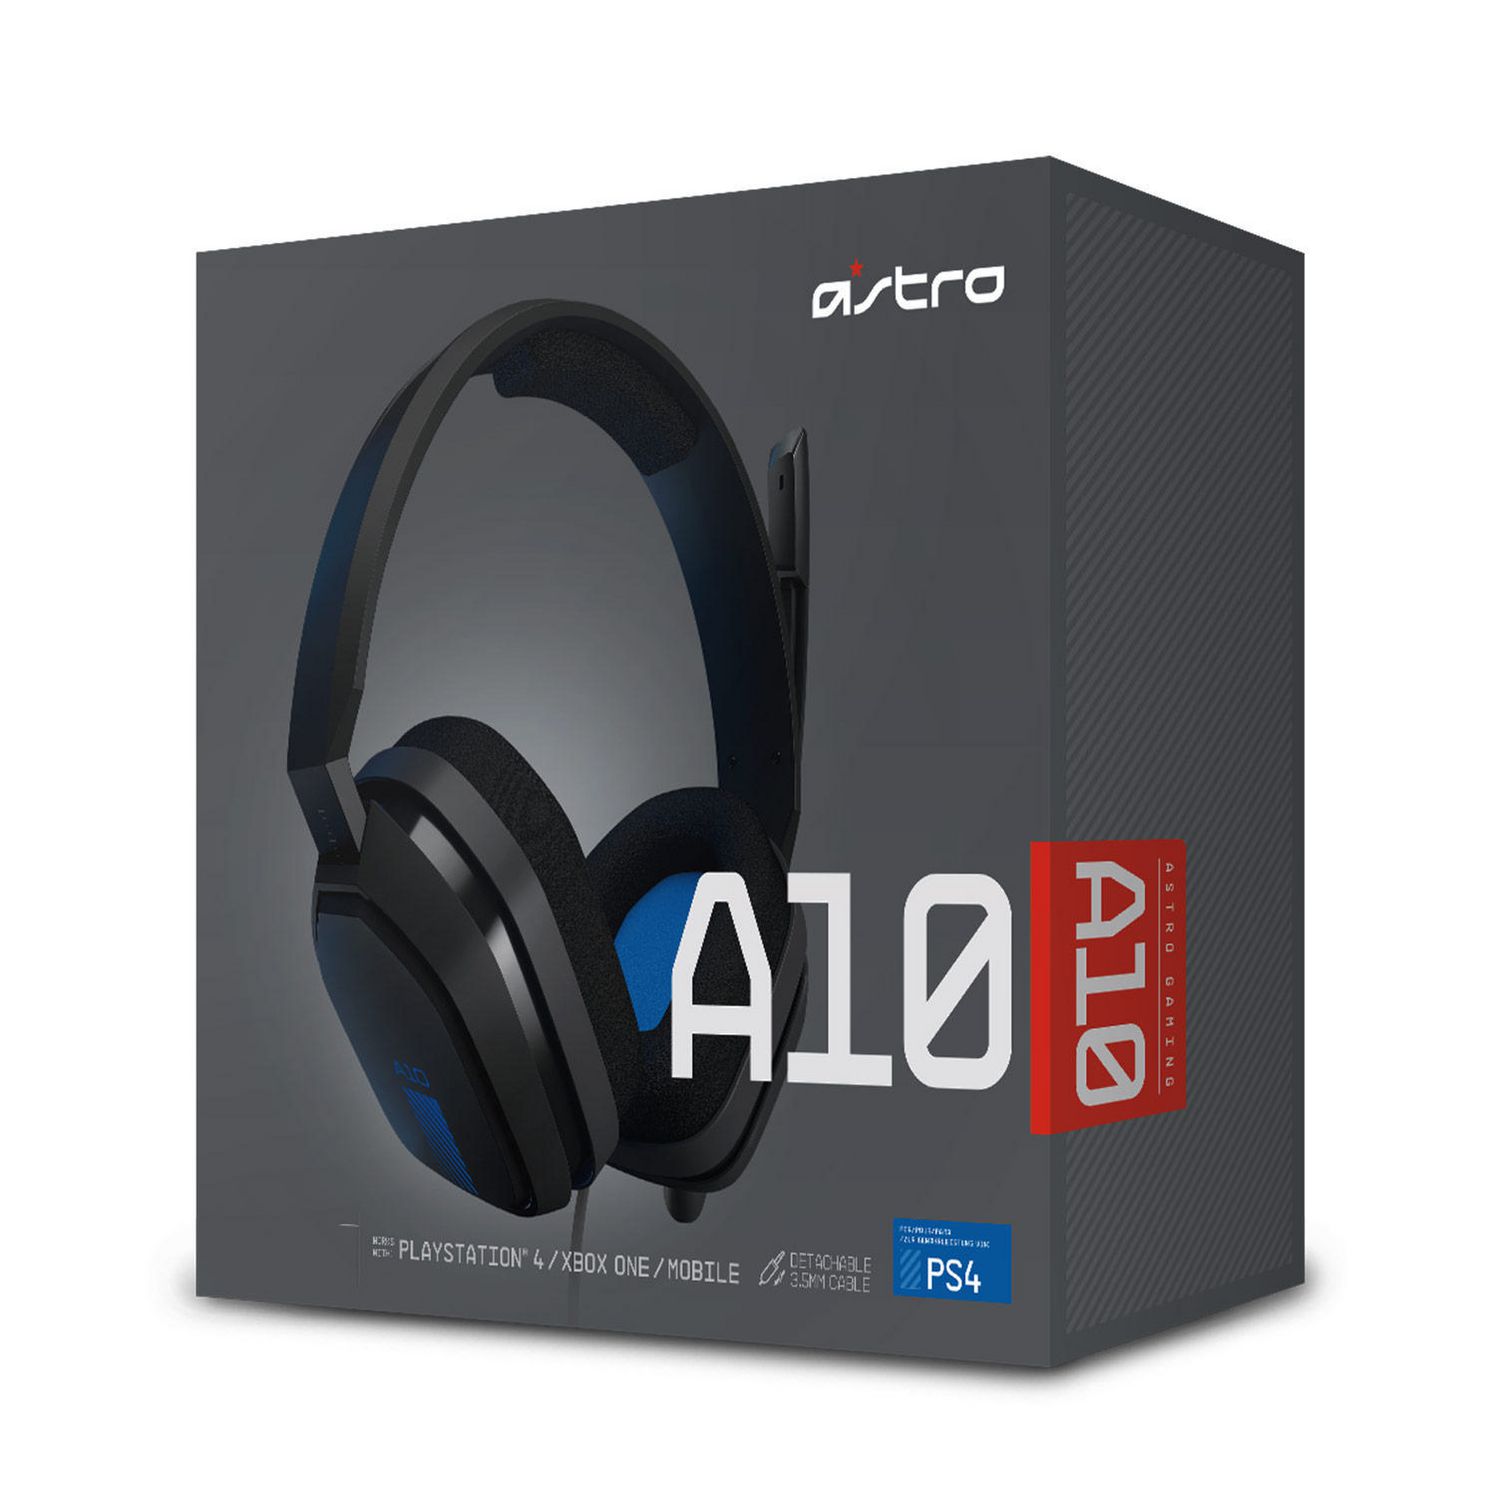 astro gaming headsets ps4